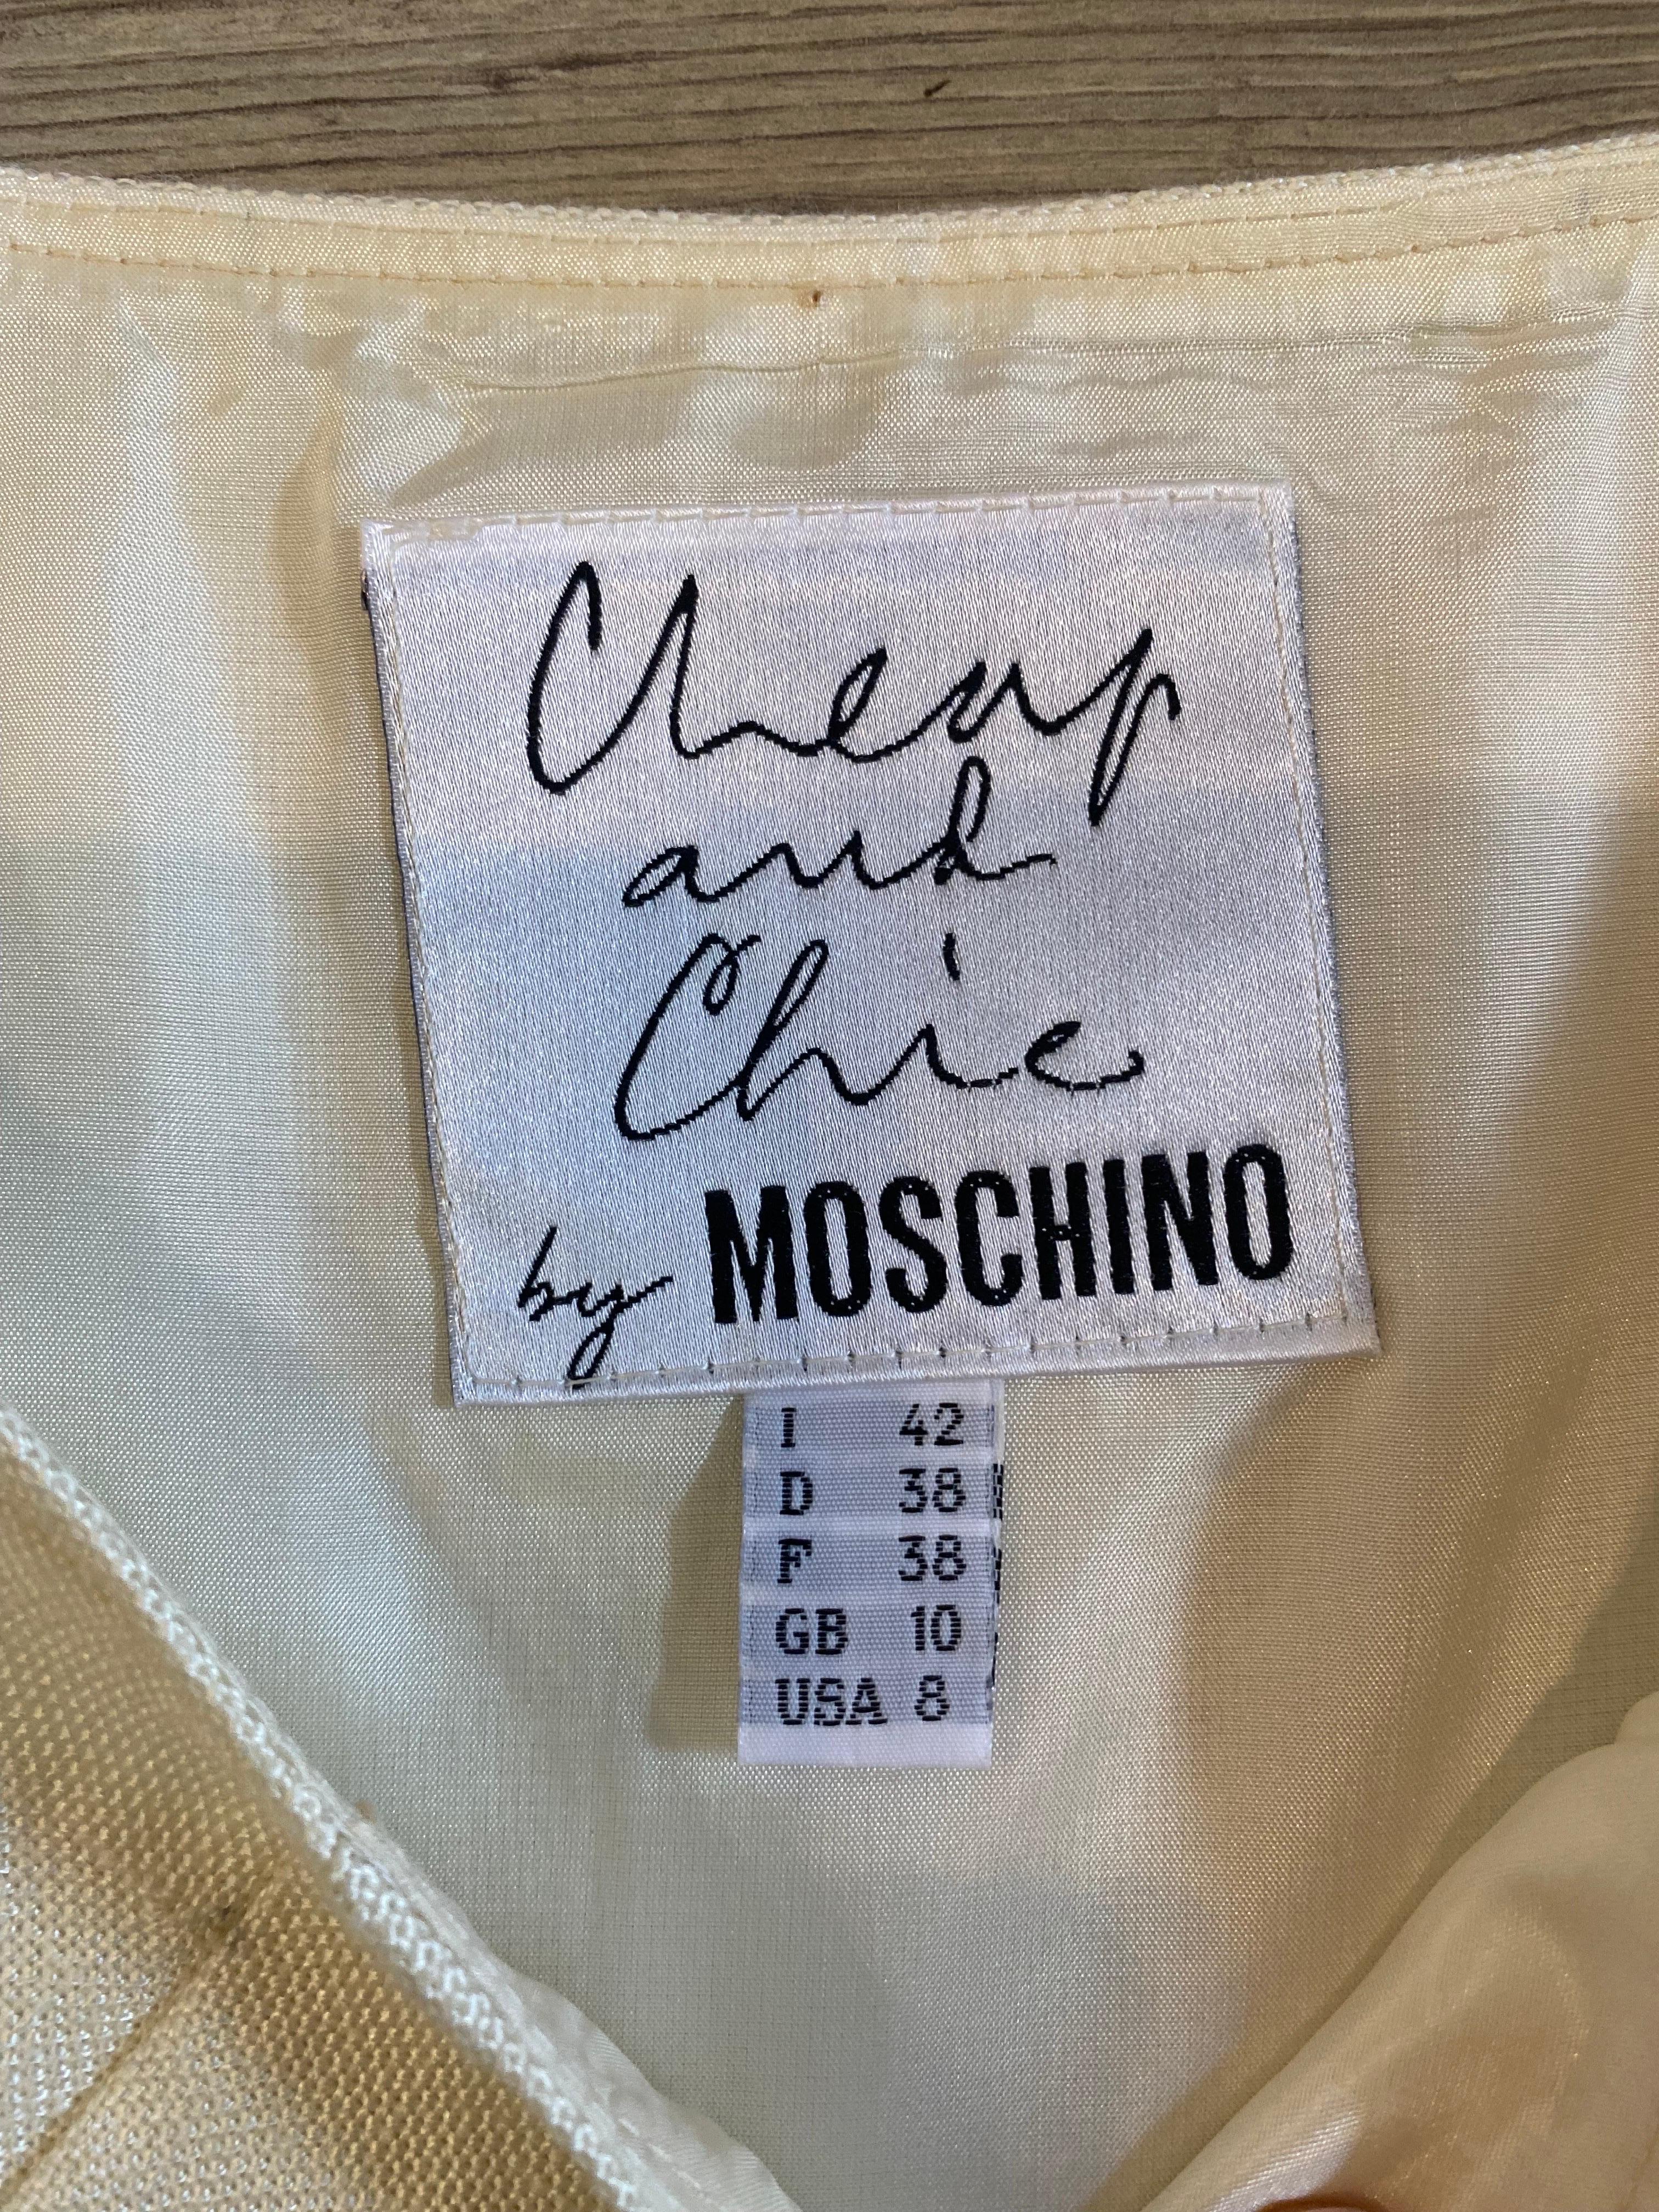 Costume Moschino Cheap and Chic en vente 3